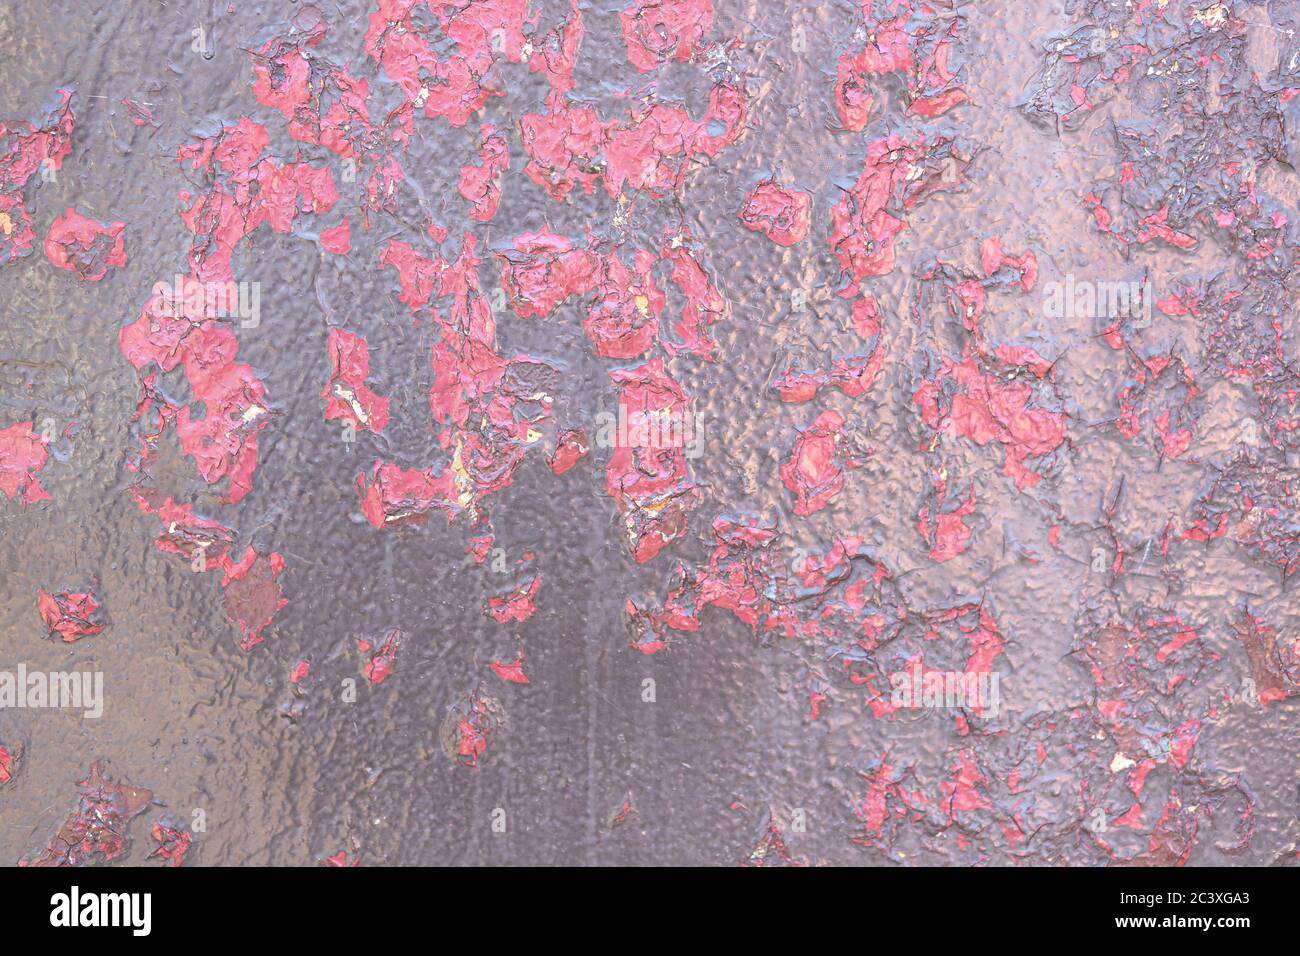 Texture of metal surface with flaking brown and raspberry-red paint. Background, close-up Stock Photo